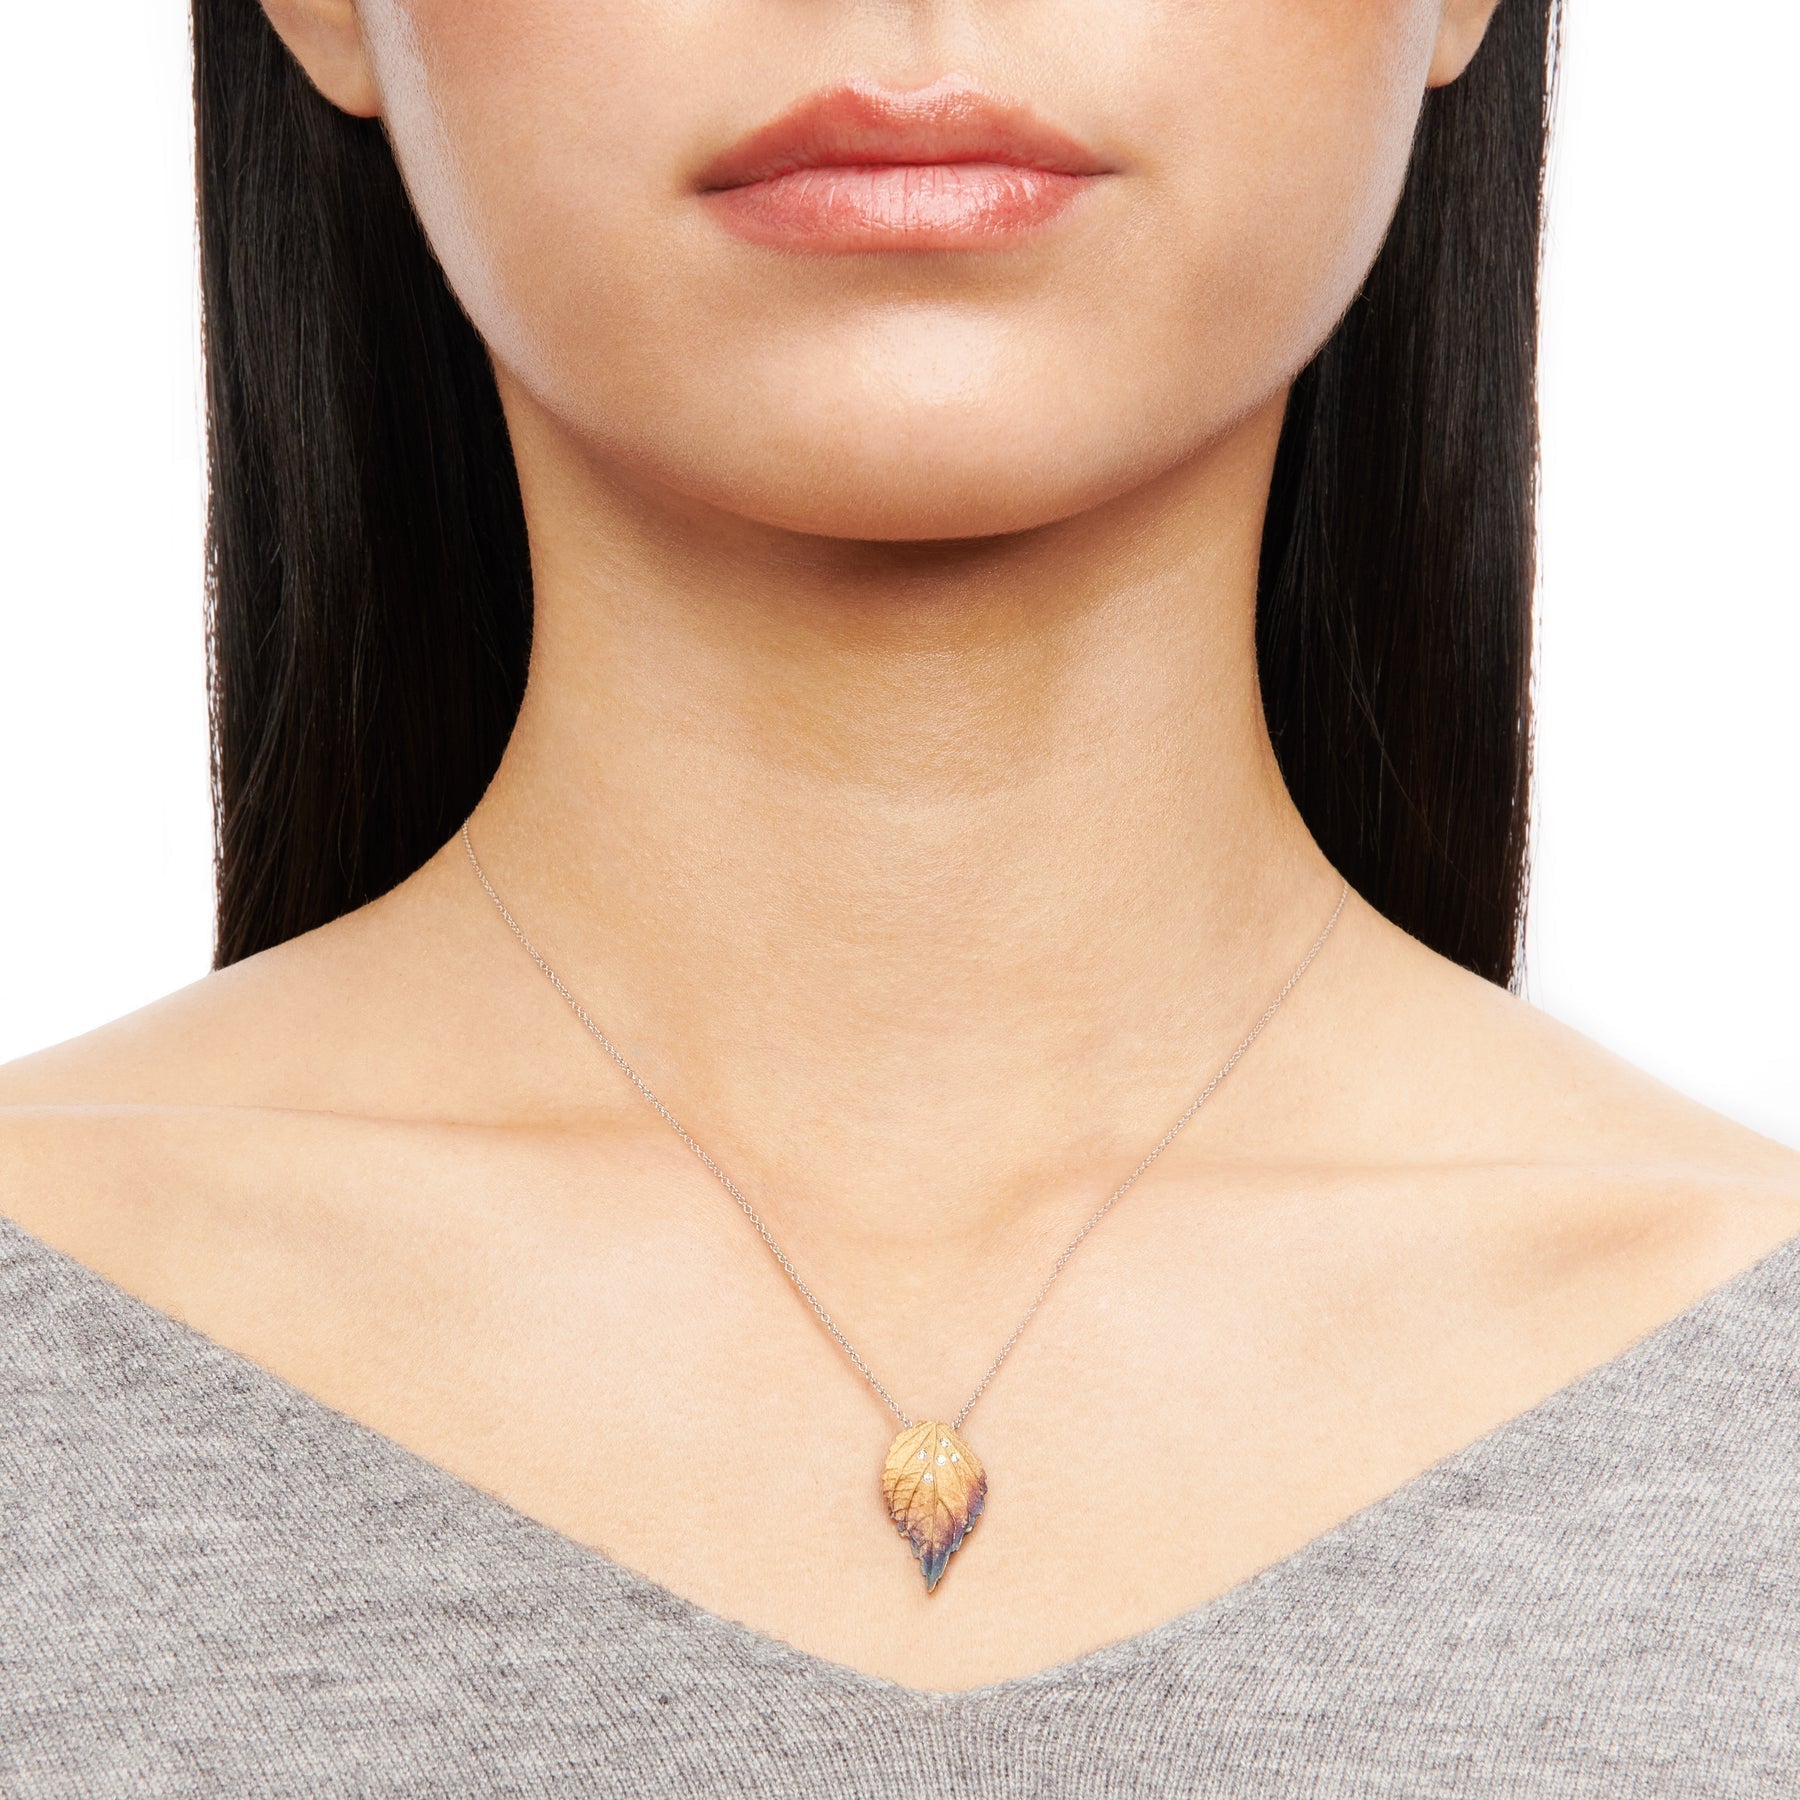 Fallen Leaves Pendant Necklace in 18k Gold with Diamonds DP184